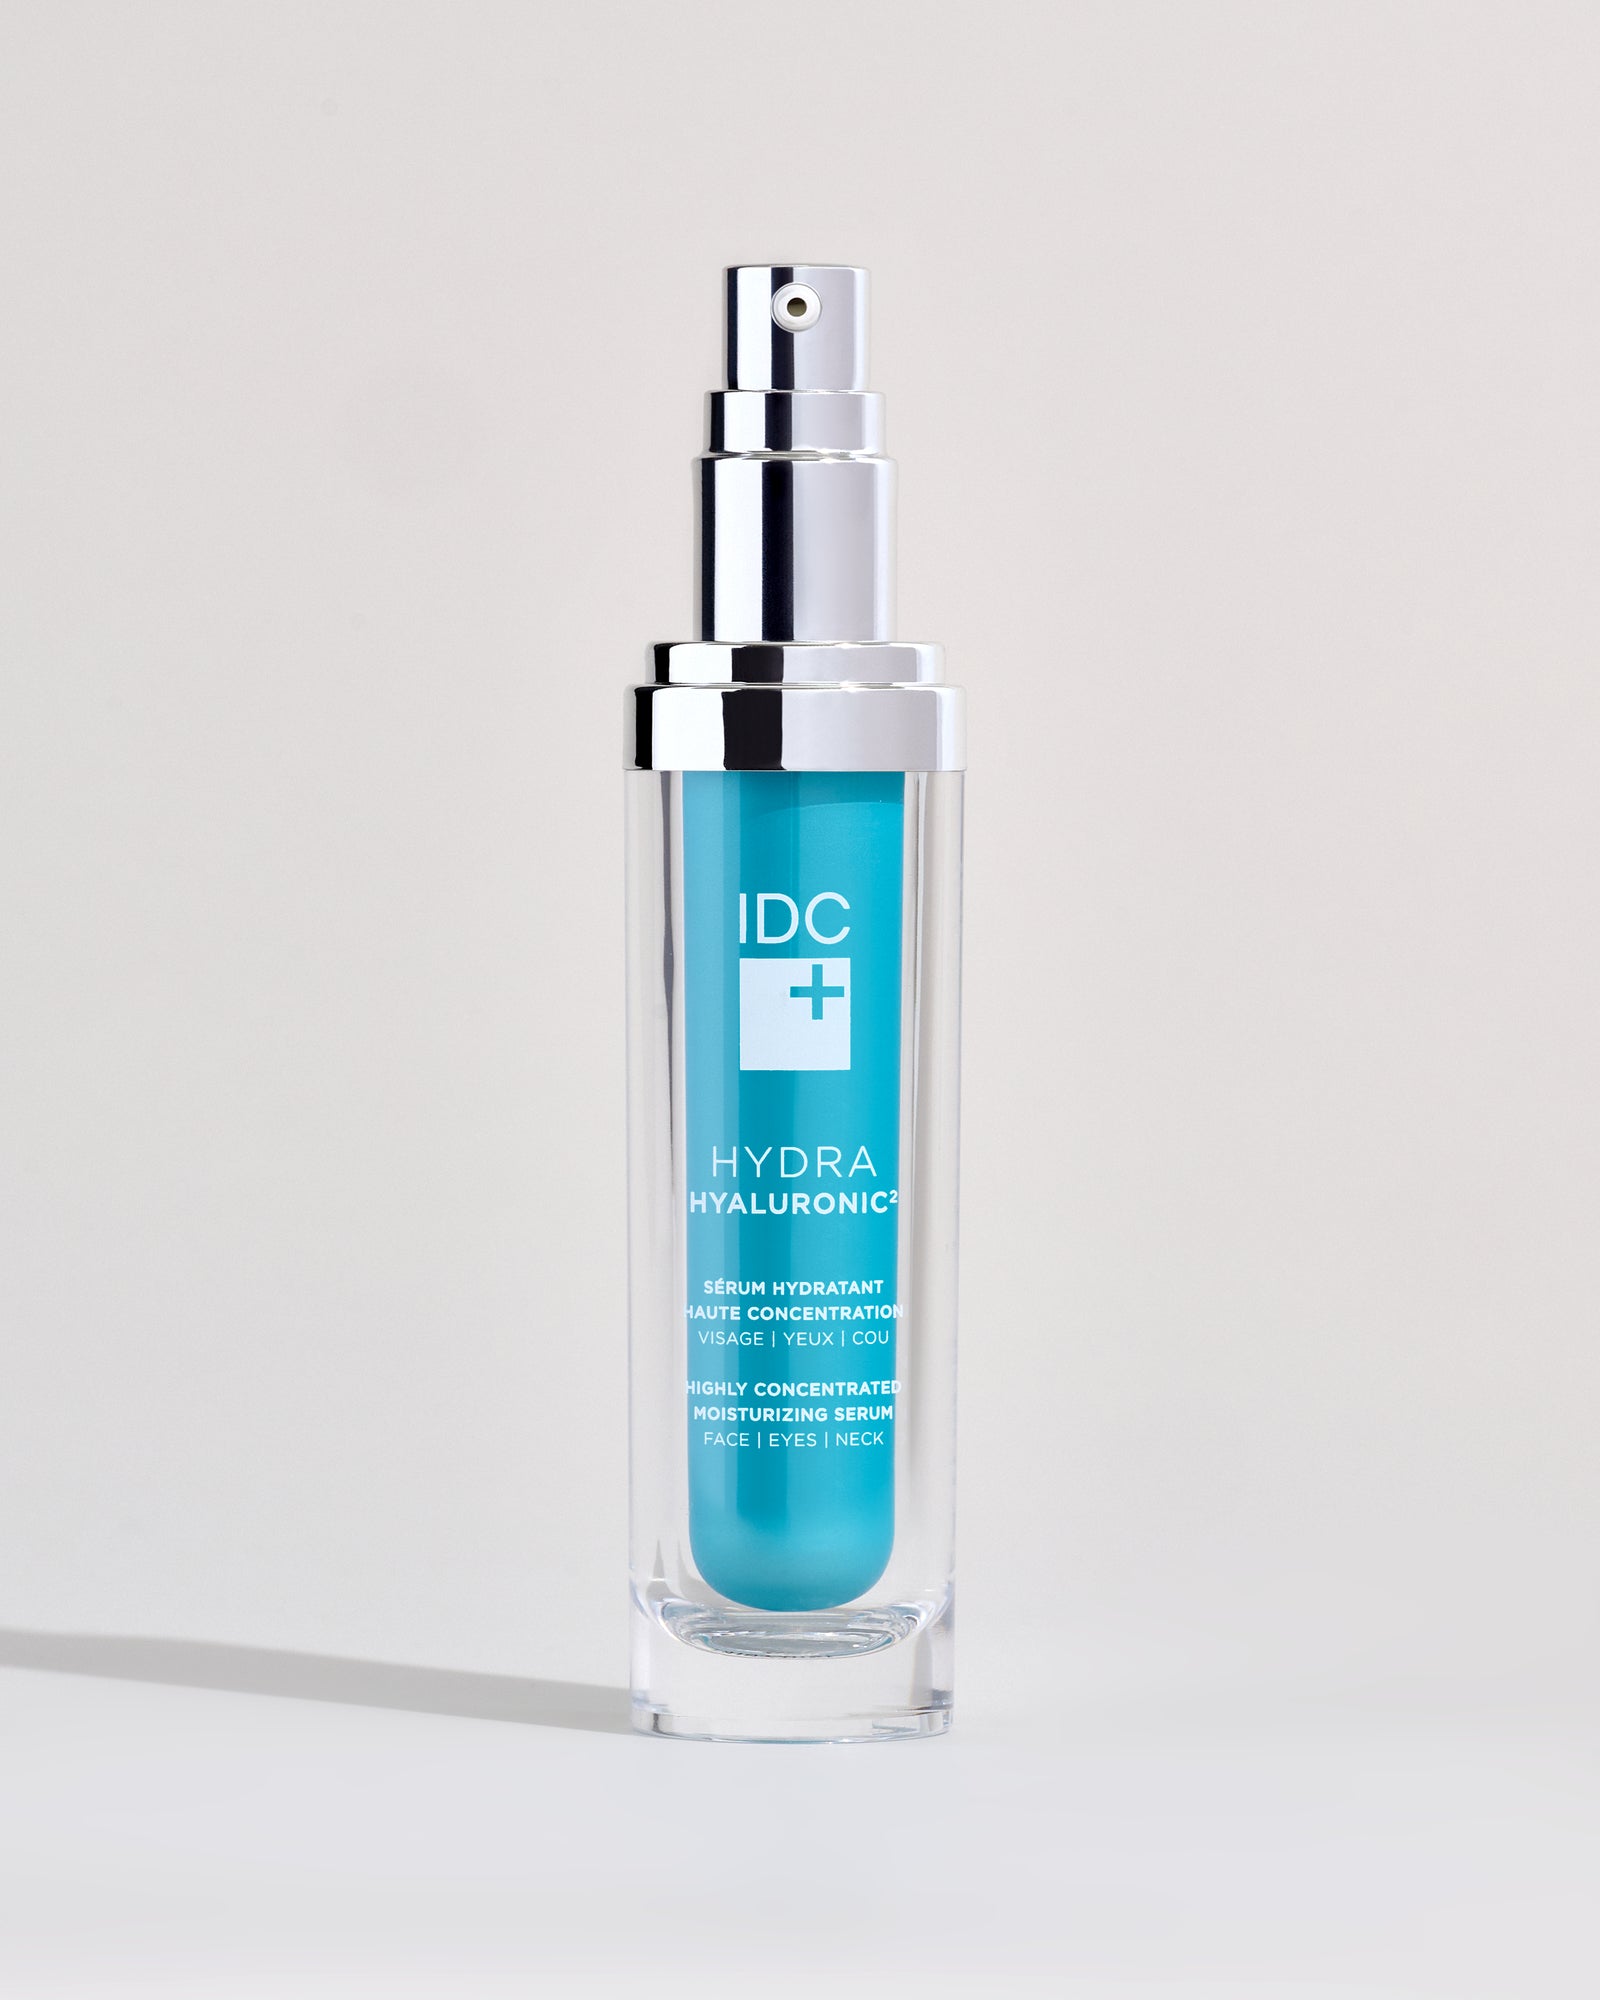 Hydra Hyaluronic2 | Sérum hydratant haute concentration